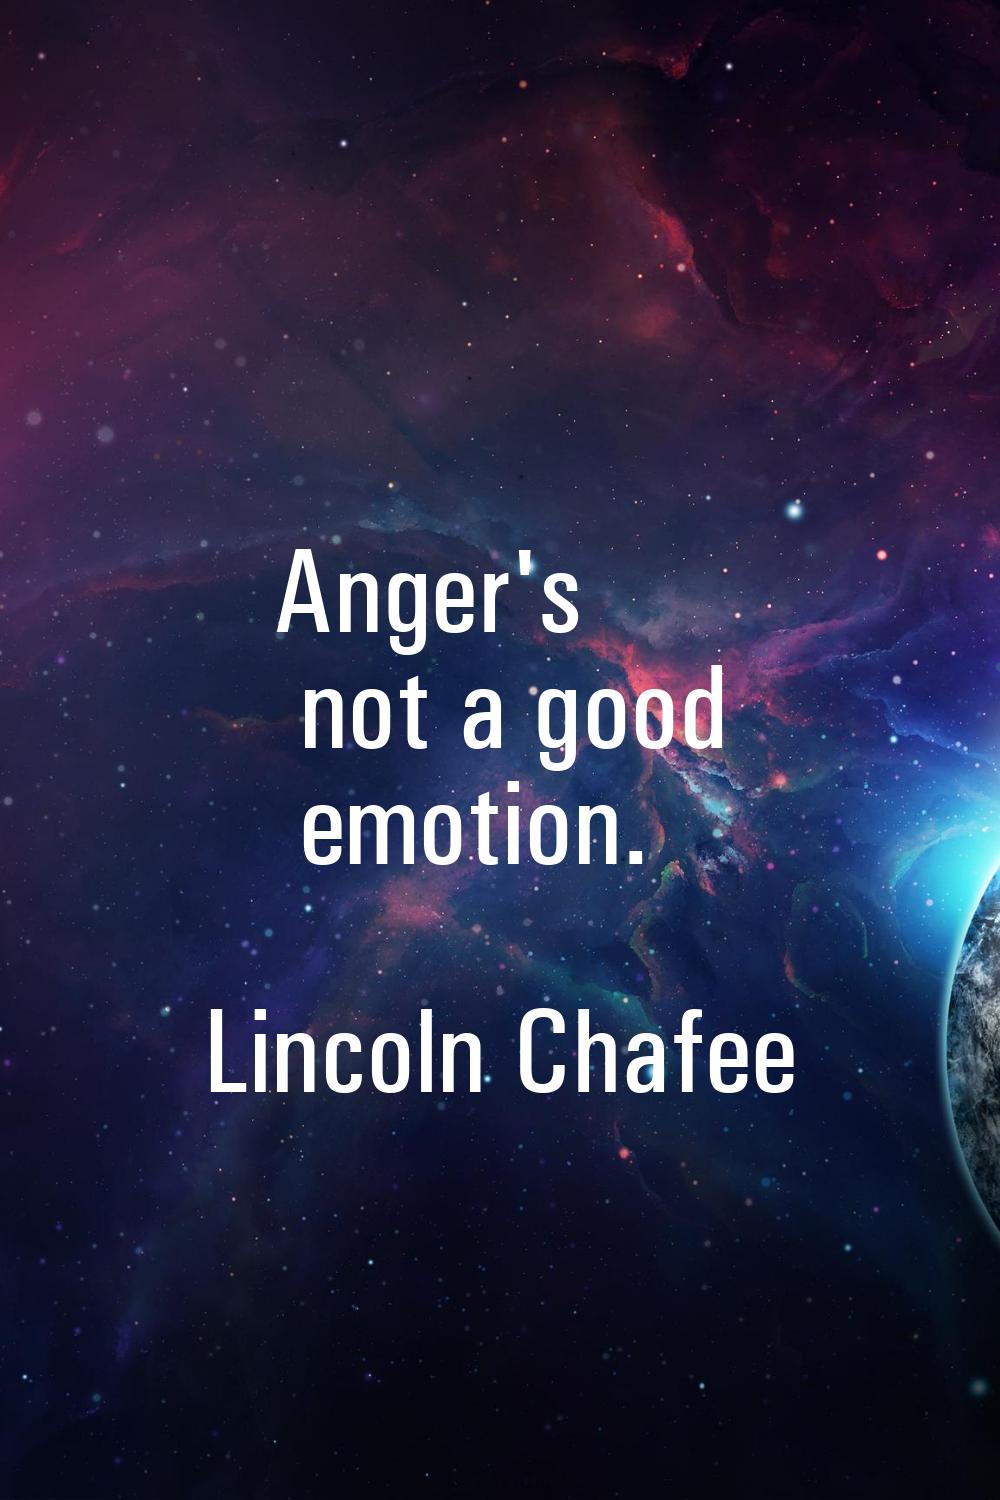 Anger's not a good emotion.